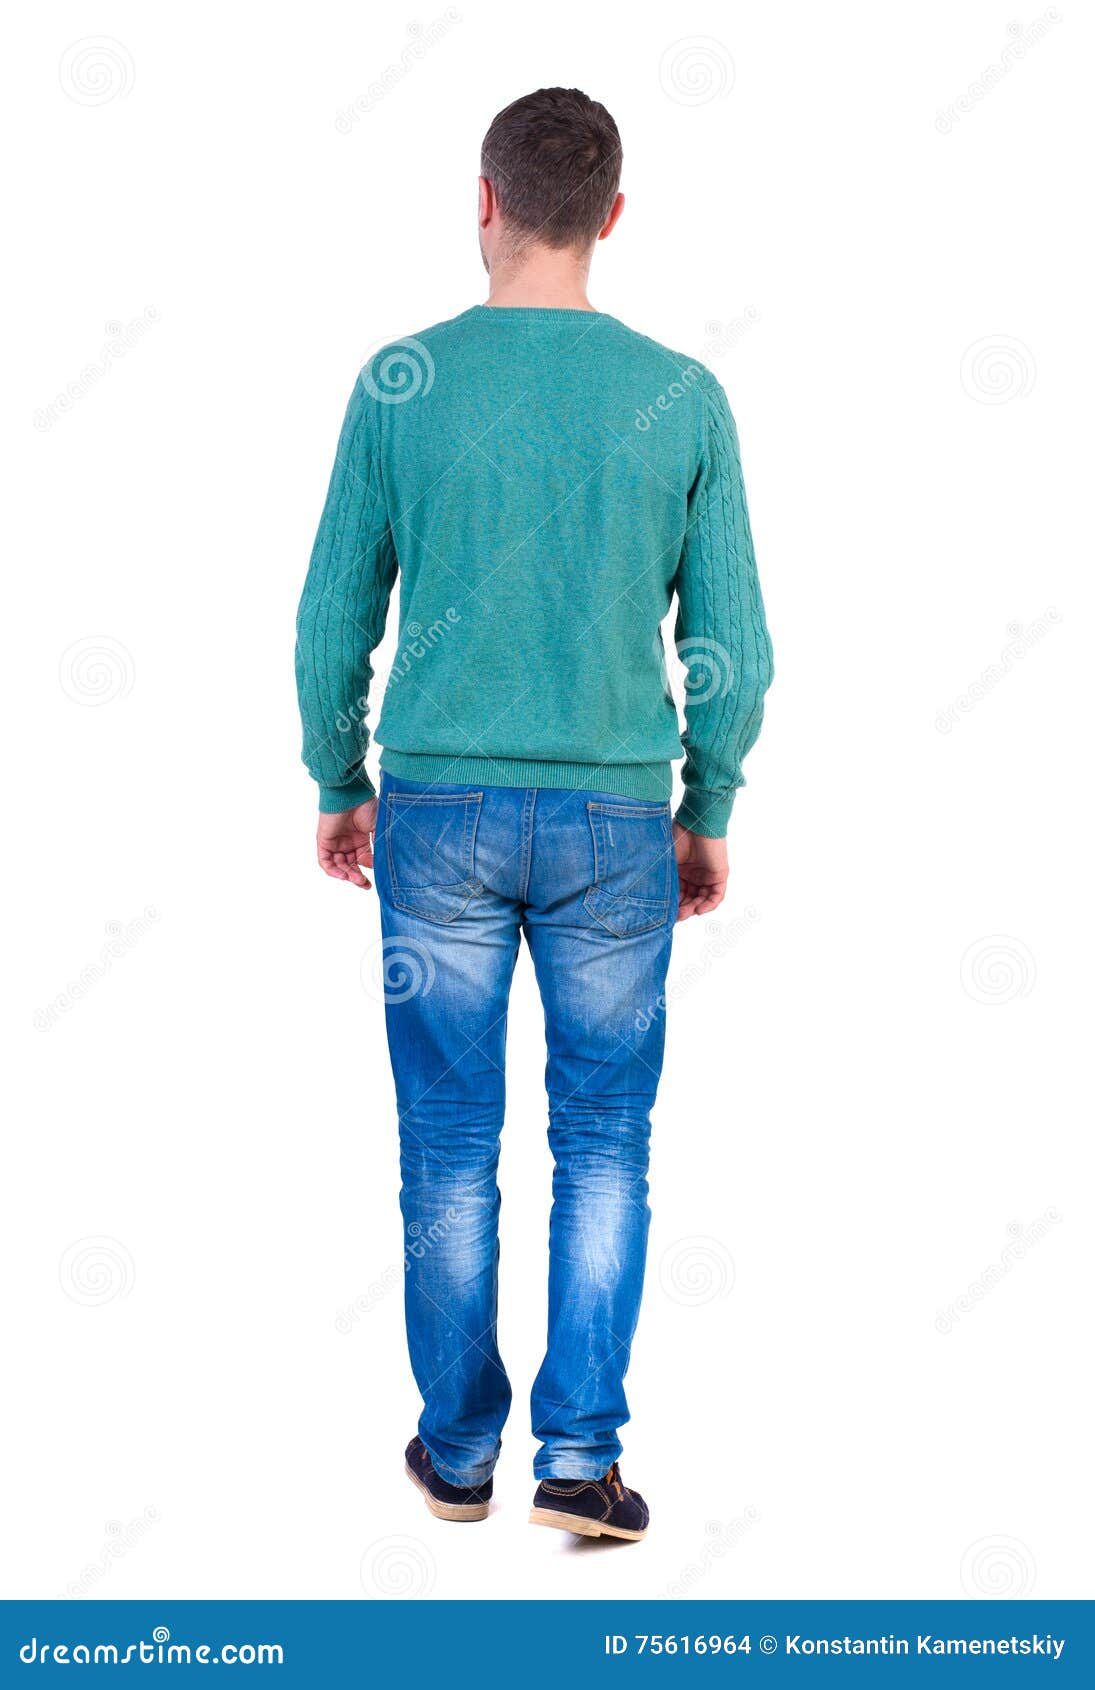 Back View of Going Handsome Man. Stock Photo - Image of caucasian ...